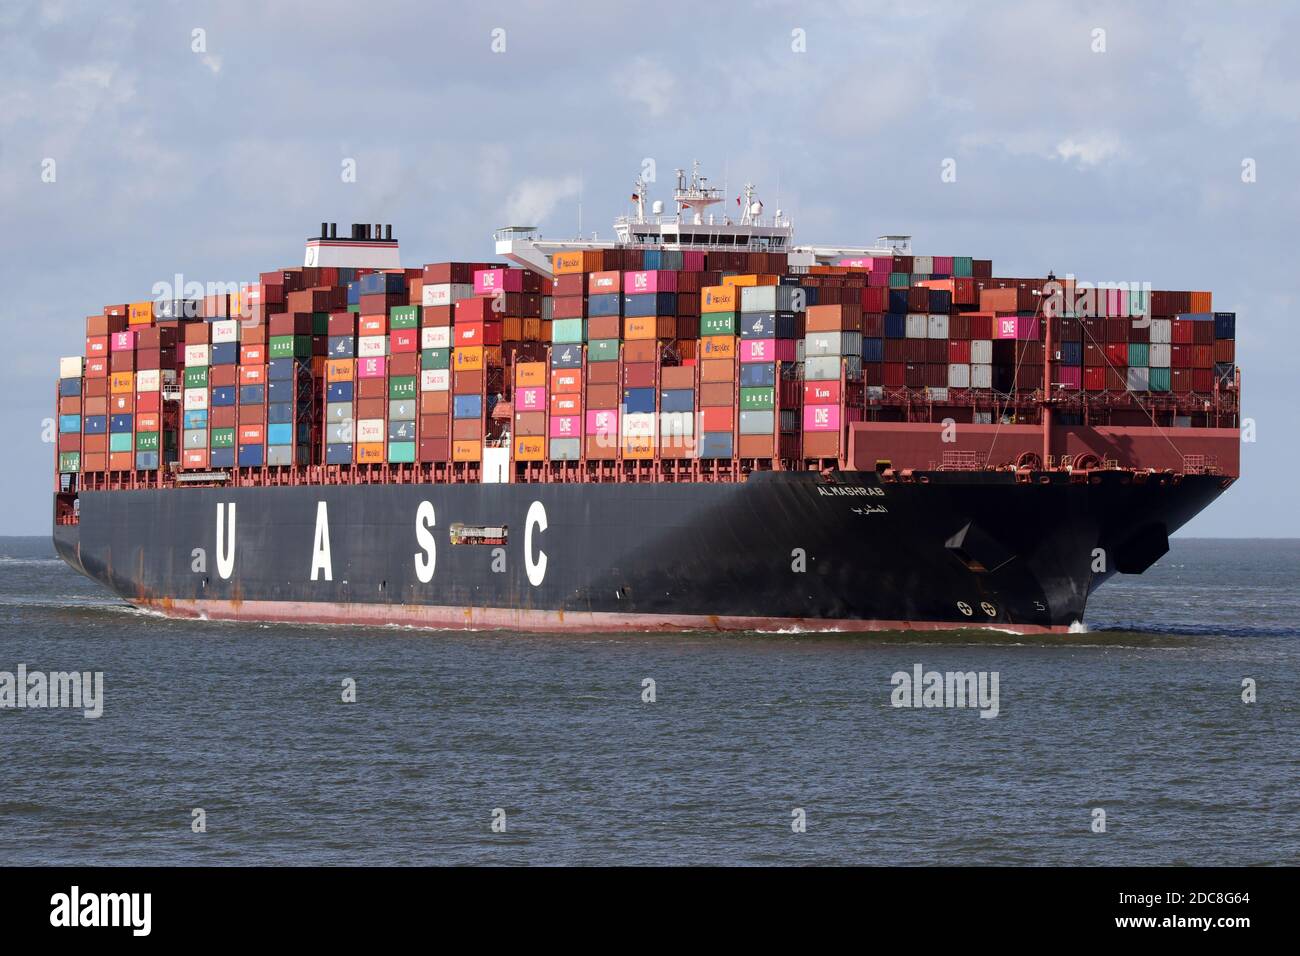 The container ship Al Mashrab will pass Cuxhaven on August 23, 2020 on its way to Hamburg. Stock Photo